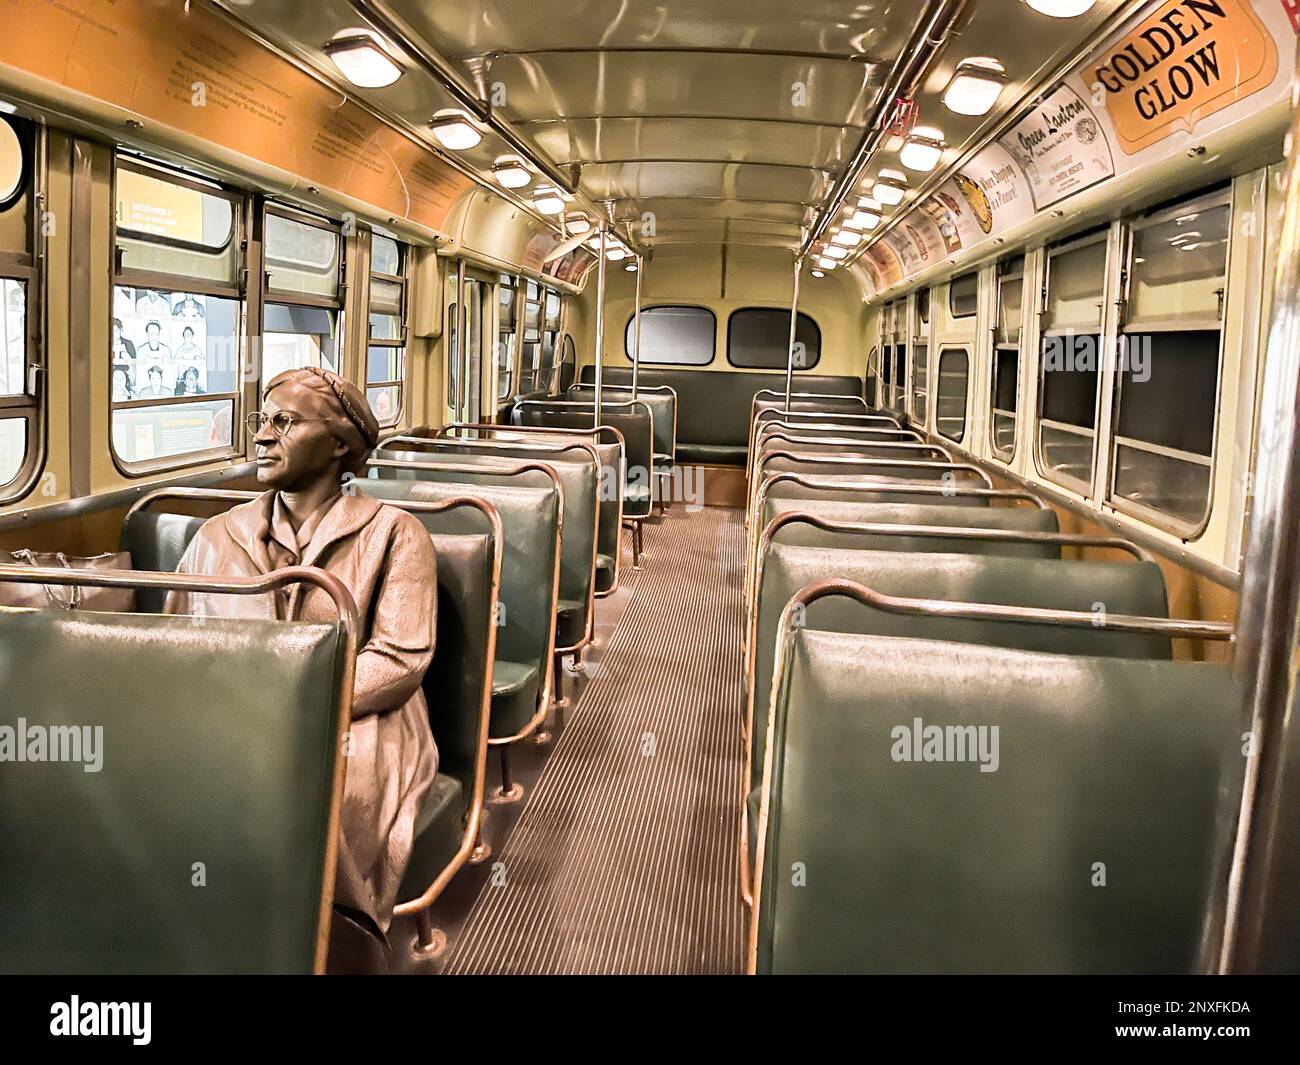 Interior of the National Civil Rights Museum, Lorraine Motel, Memphis, Tennessee, showing Rosa Parks/Montgomery Bus Boycott tribute. Stock Photo